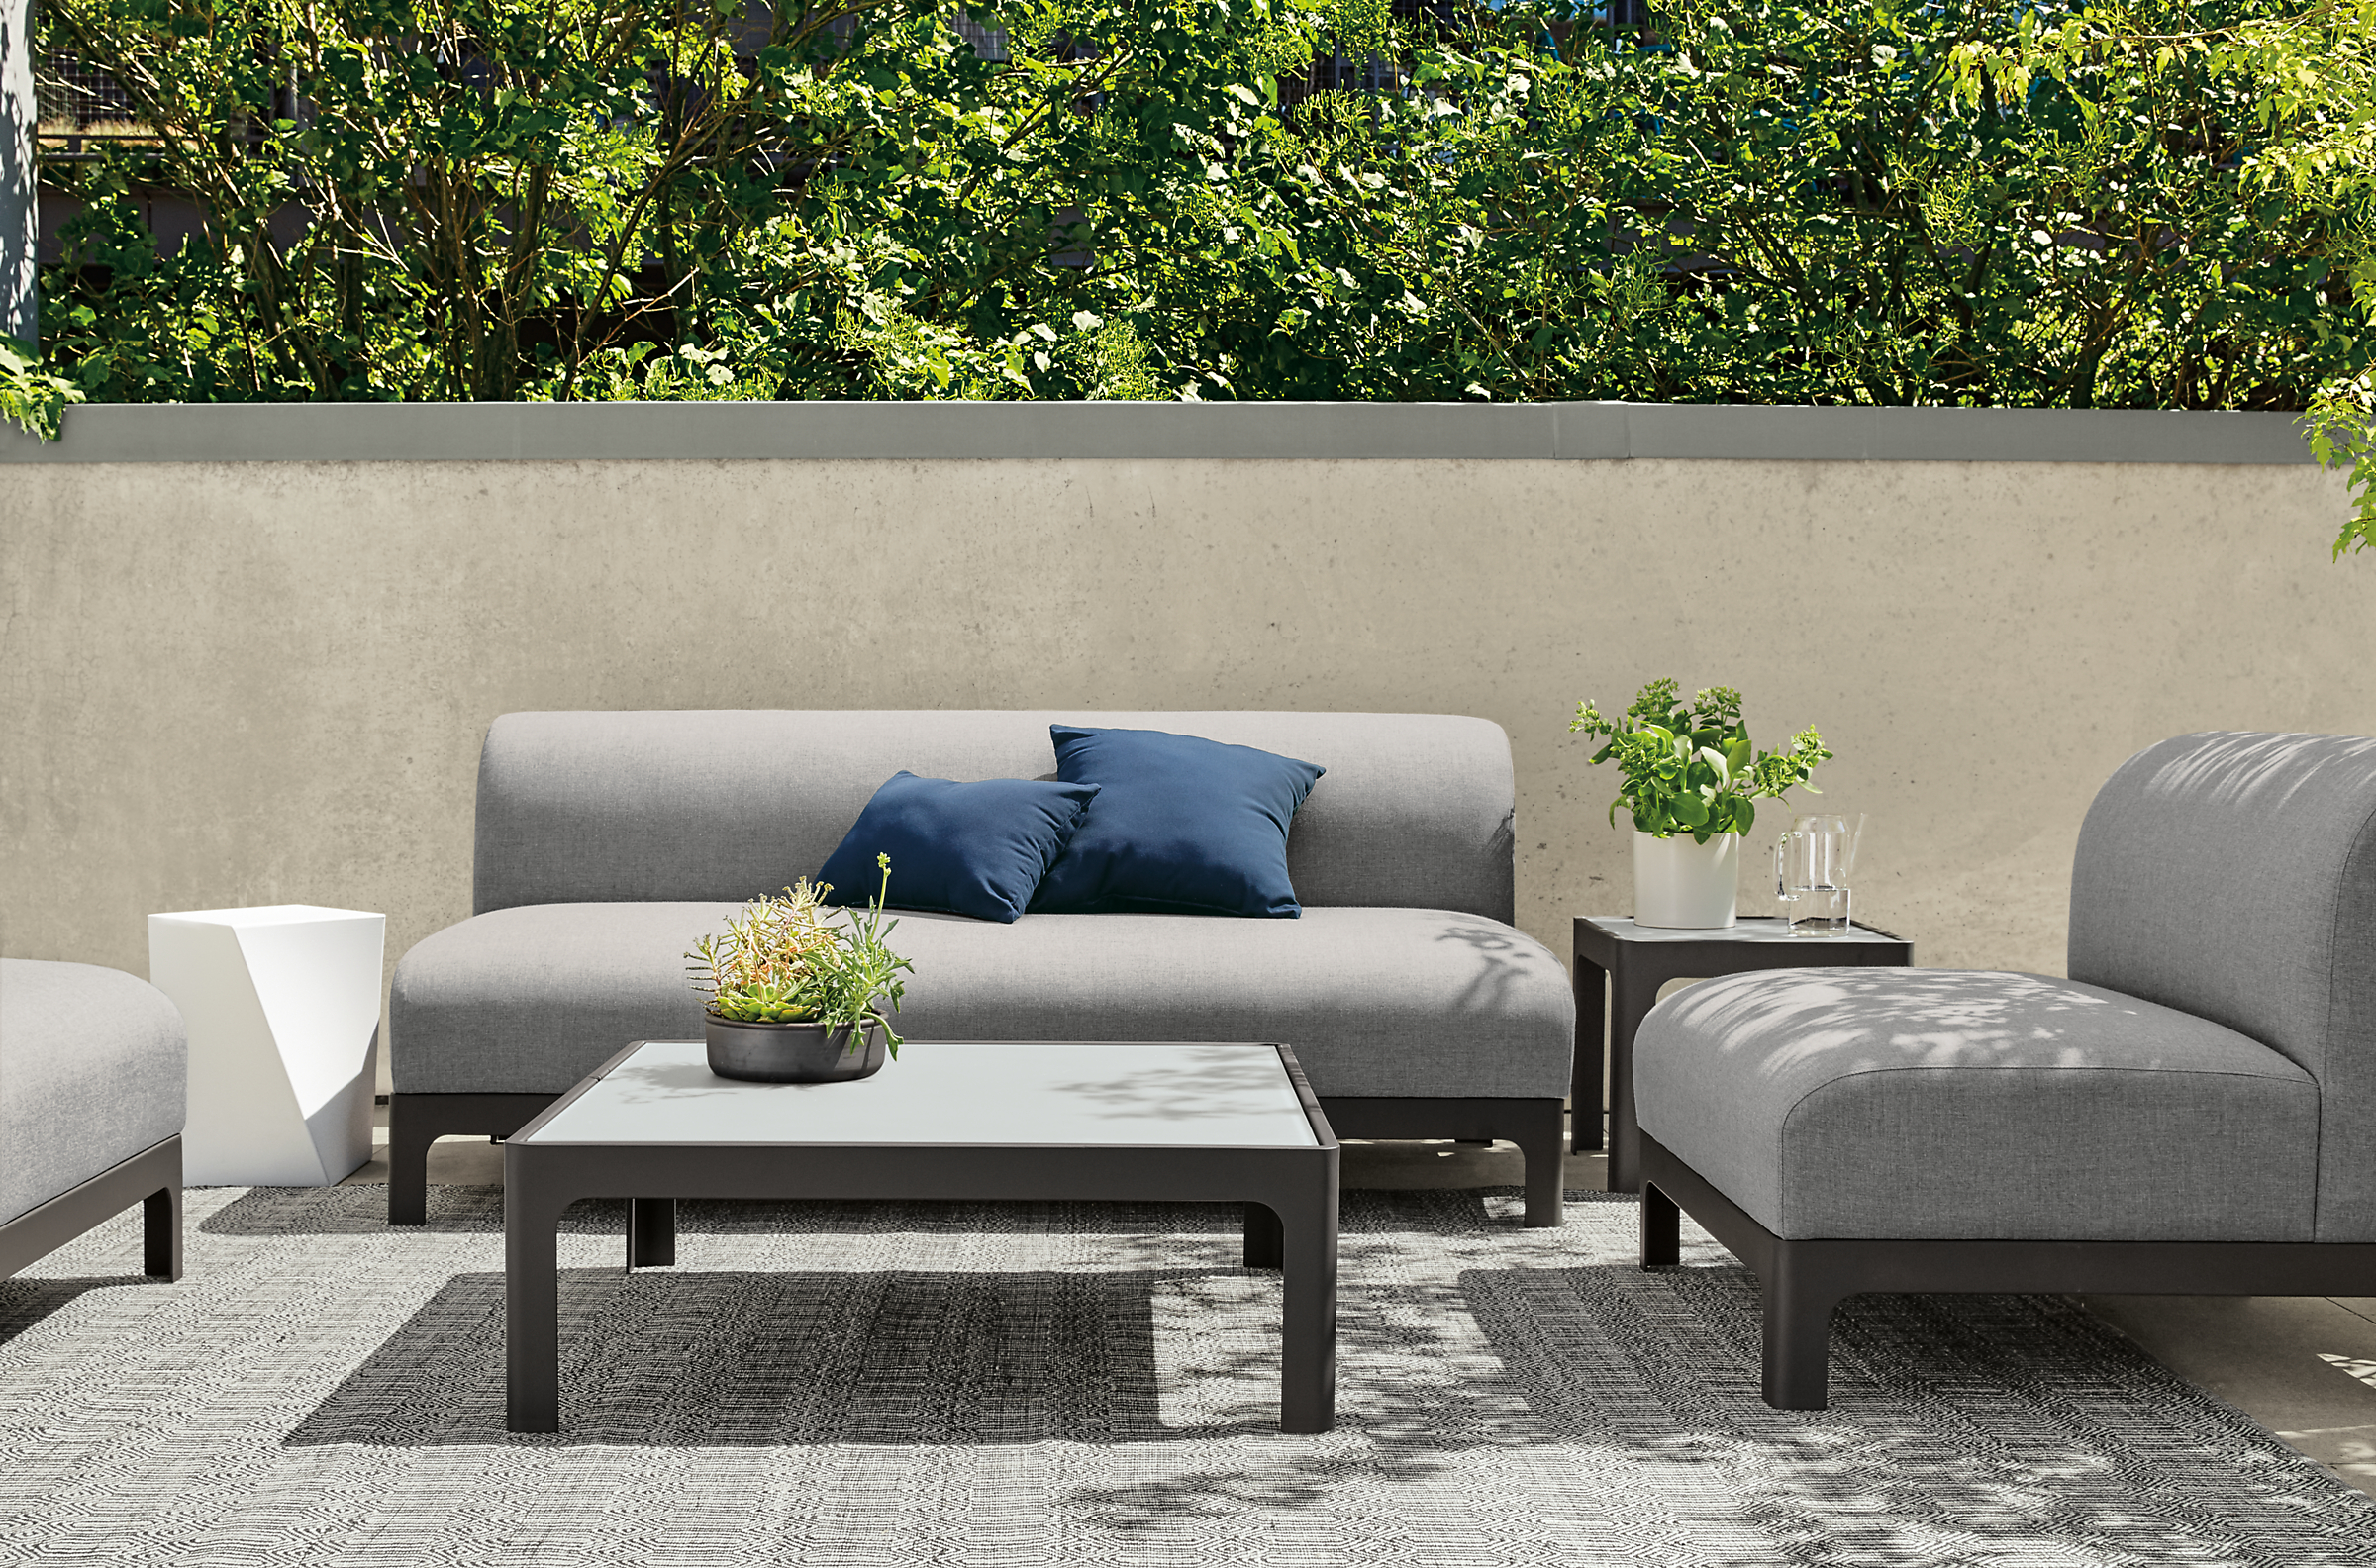 Modern Crescent outdoor sofas in grey fabric and table.